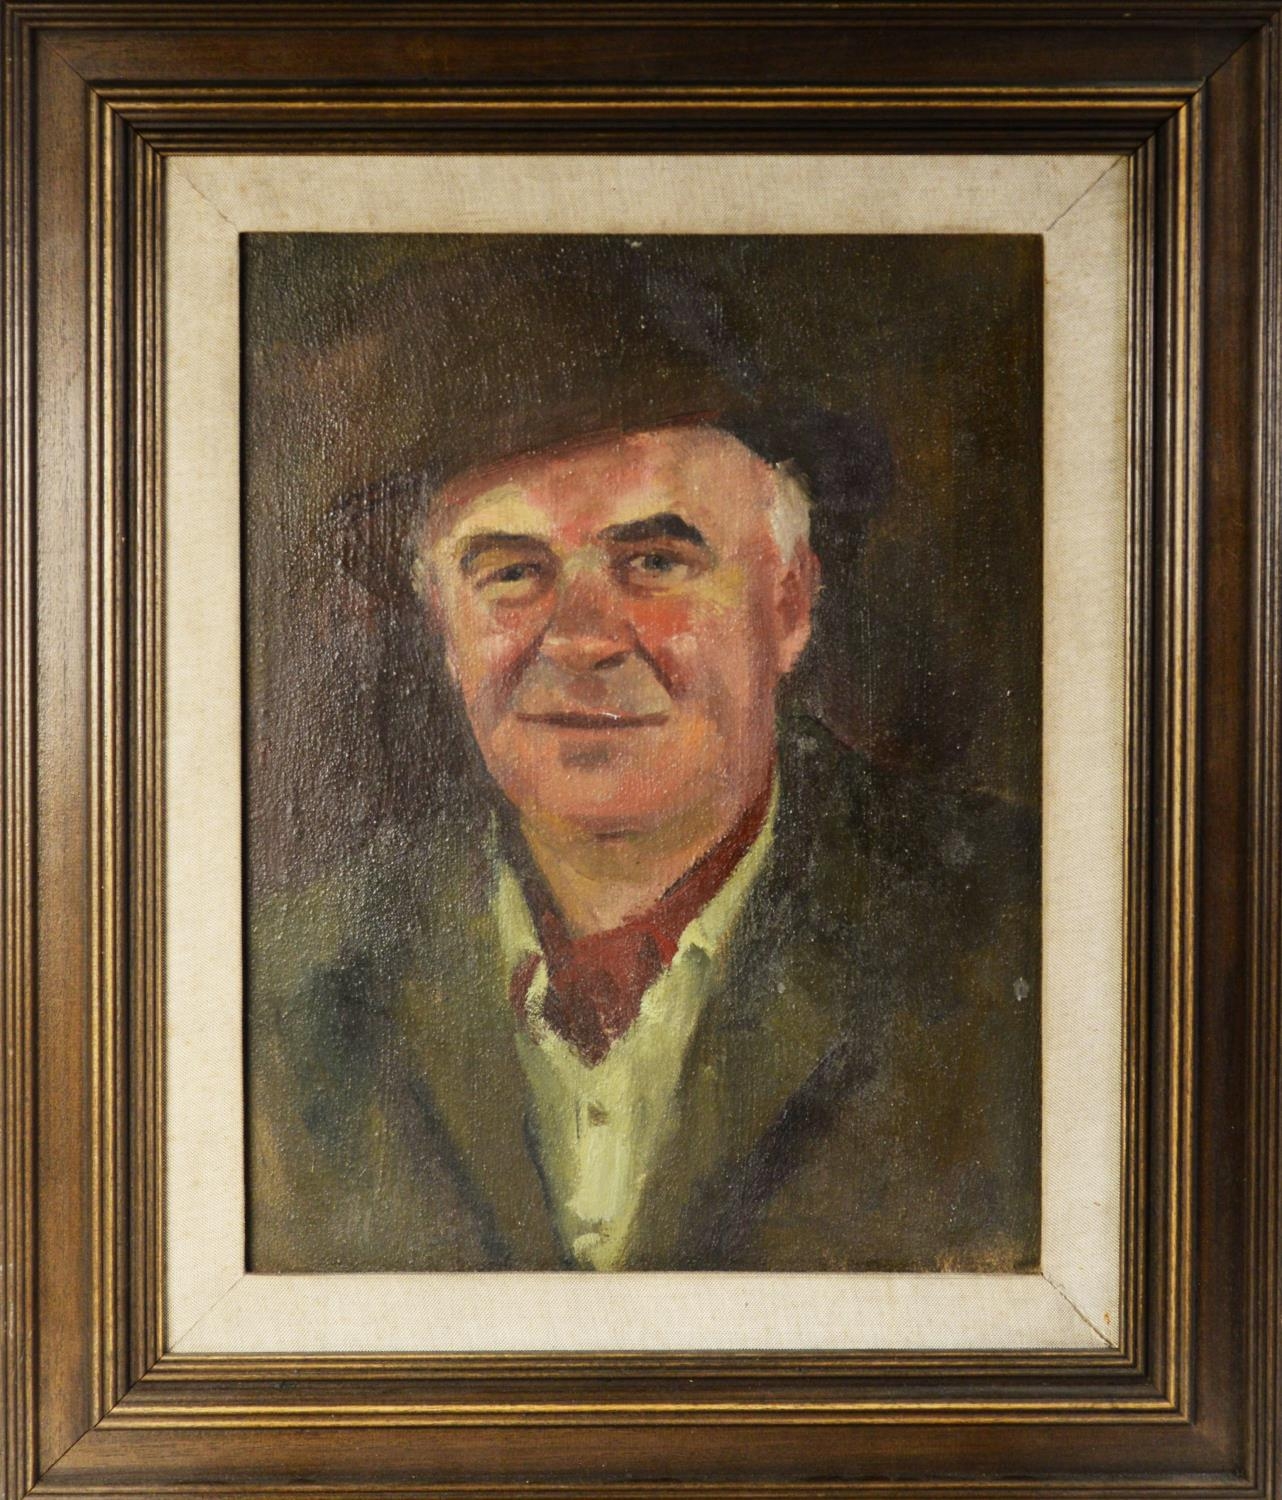 ATTRIBUTED TO FRED DEAN (TWENTIETH CENTURY) OIL ON BOARD Shoulder length portrait of the artist - Image 2 of 2